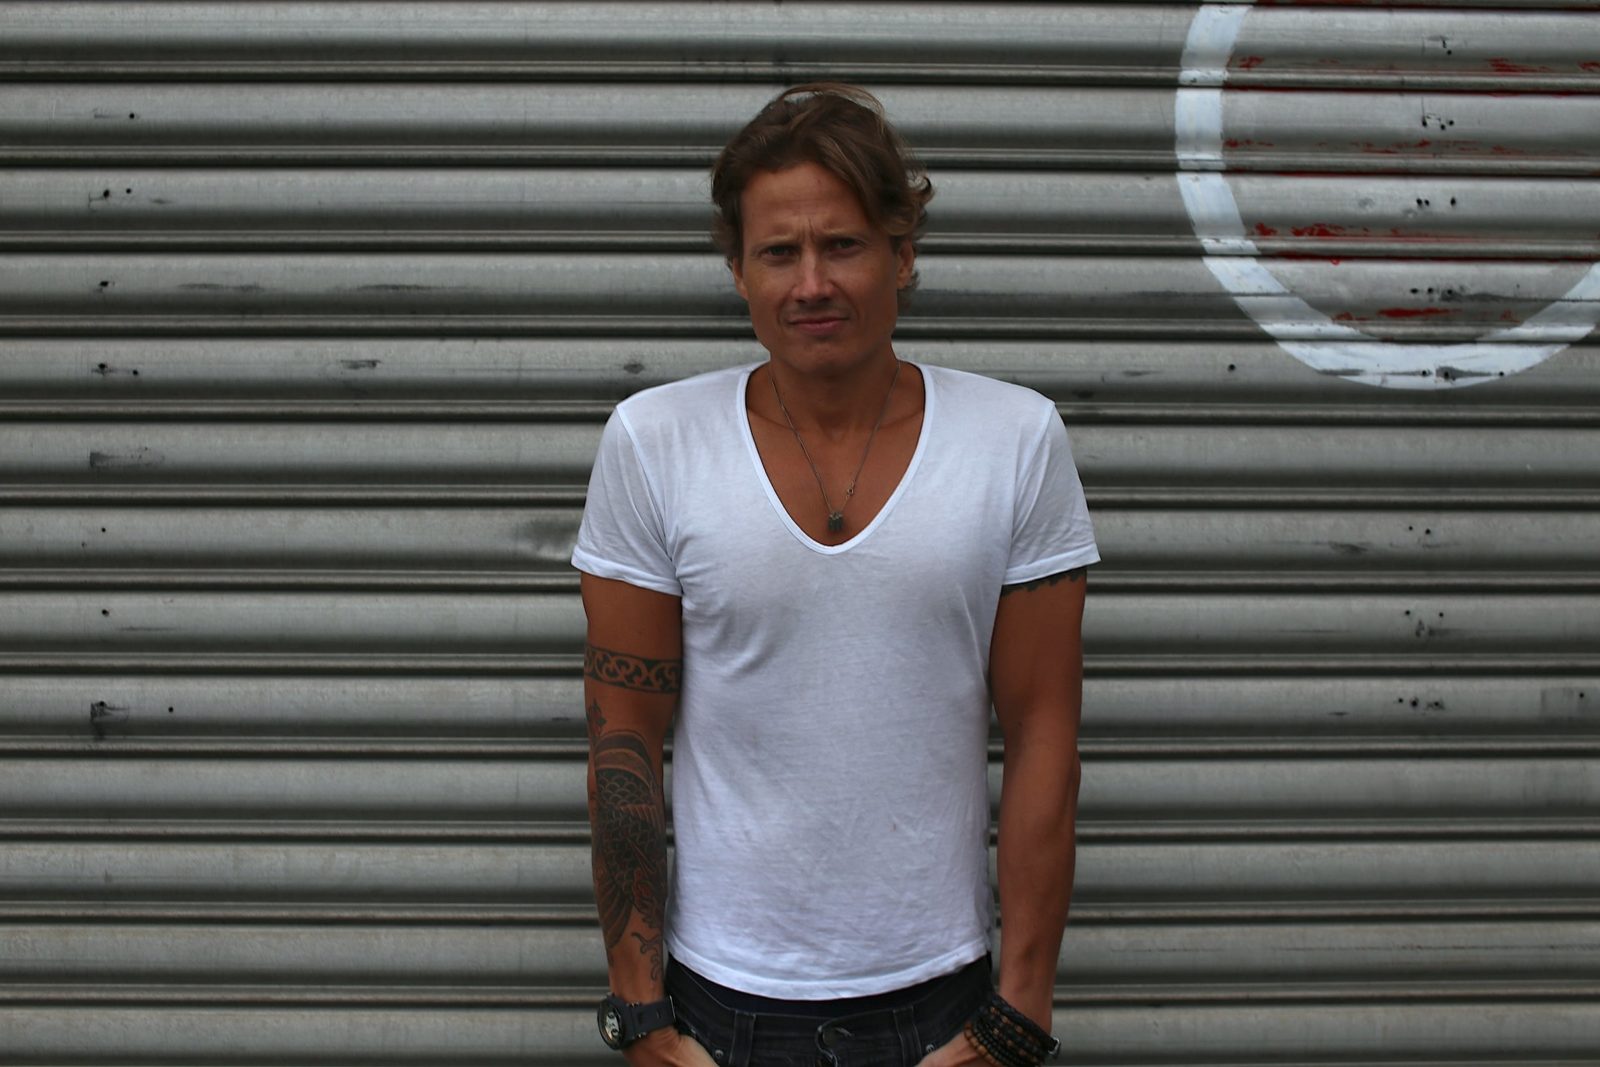 Aleksi Tuomarila standing in front of a garage door in a white t-shirt.